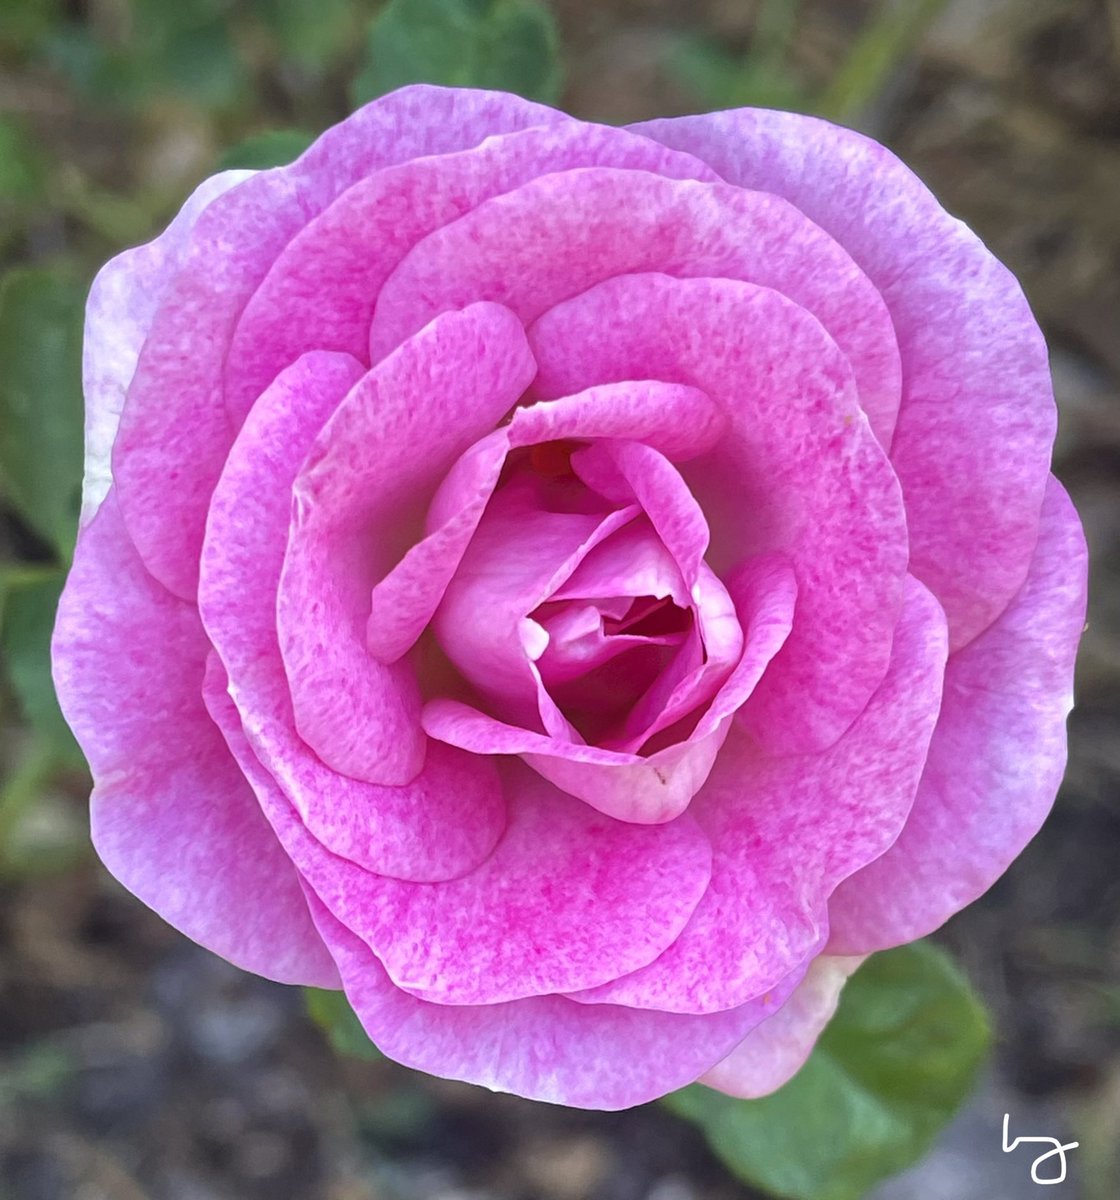 #FridayRose “All right now. Won’t you listen?” -Ozzy